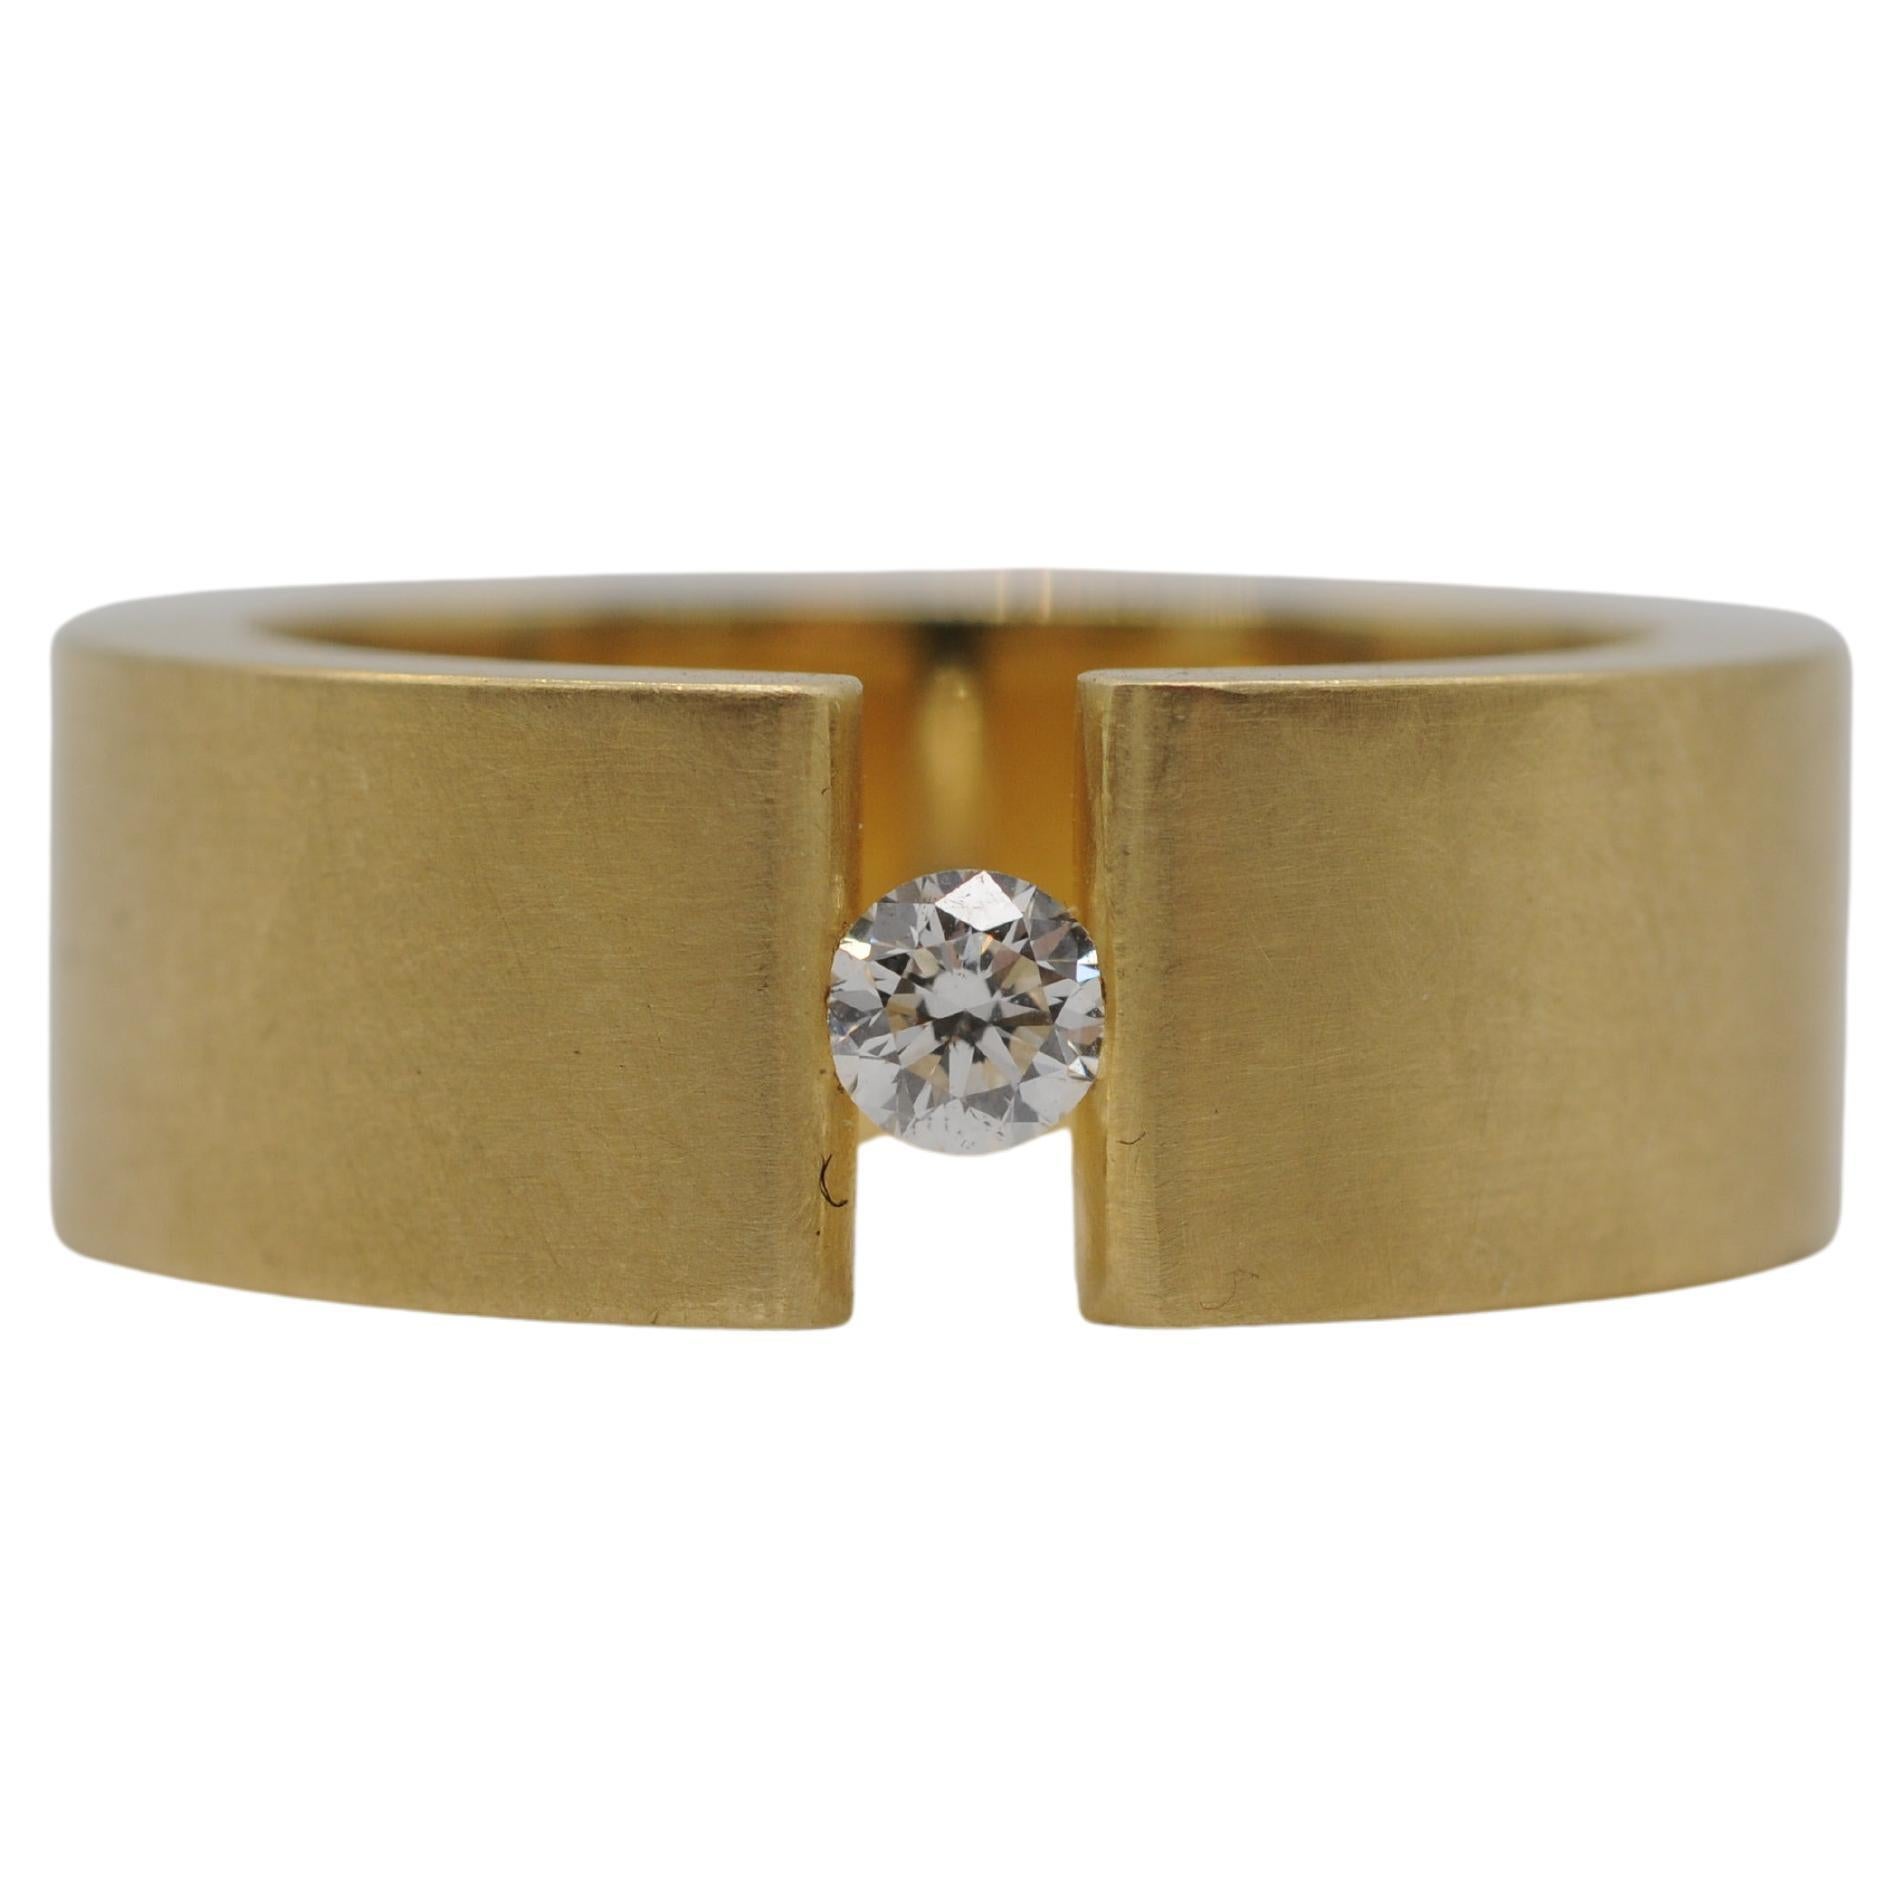 Aesthetic Movement Niessing tension ring in 18k yellow gold with a brilliant For Sale